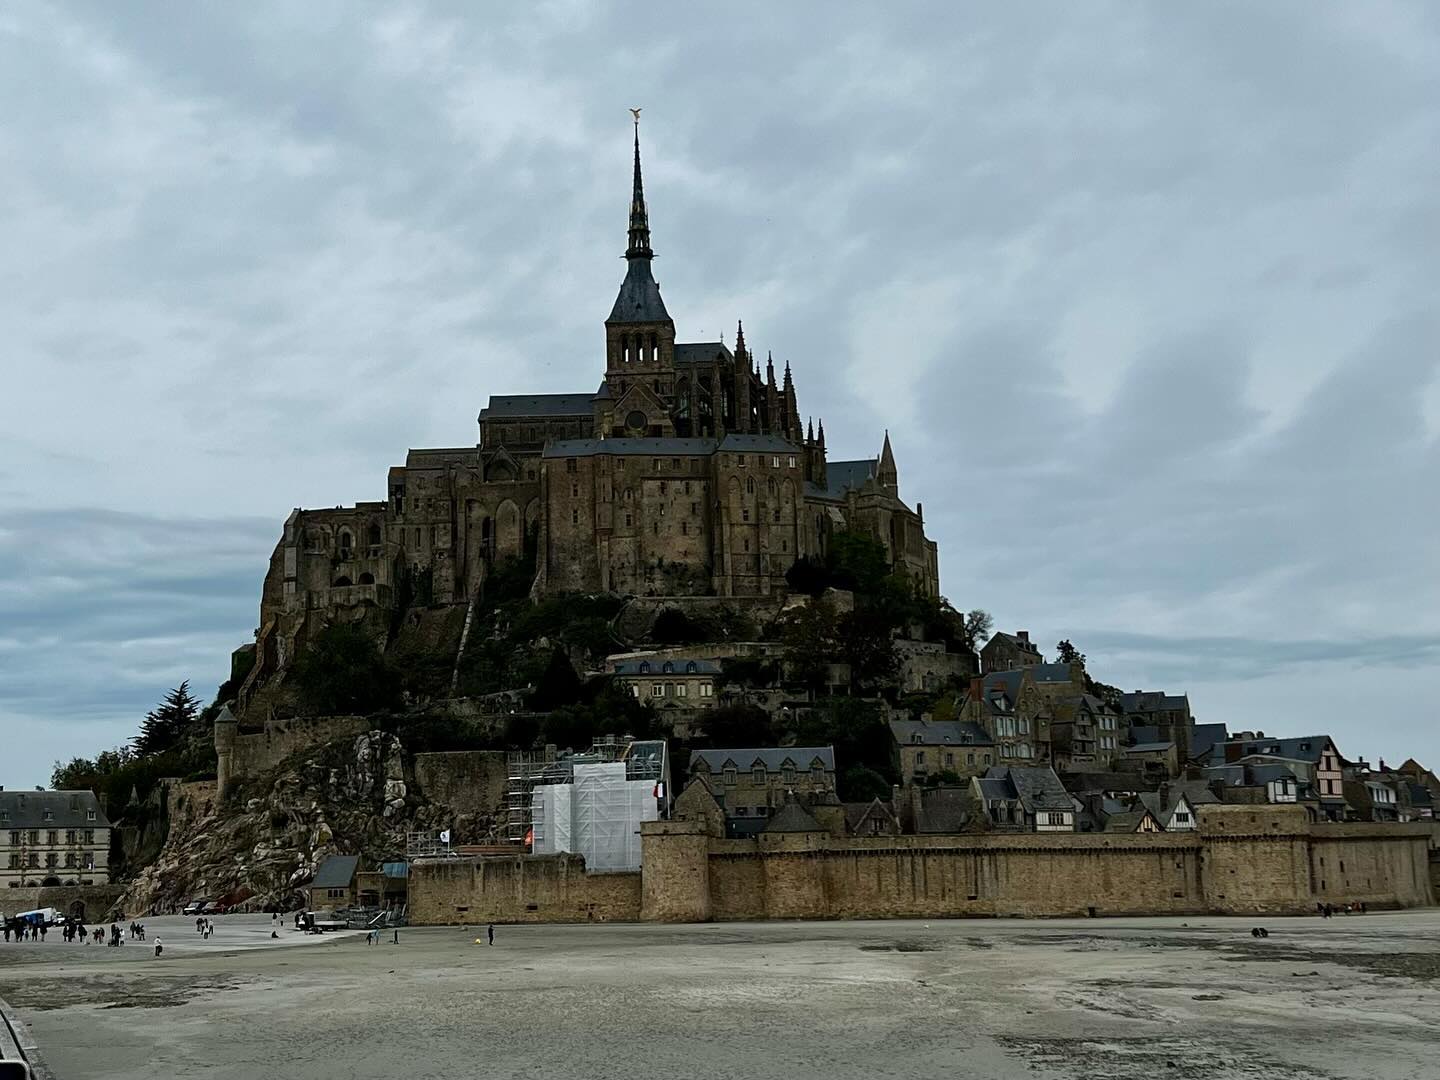 Slowly making our way home…last night at Mont Saint Michel